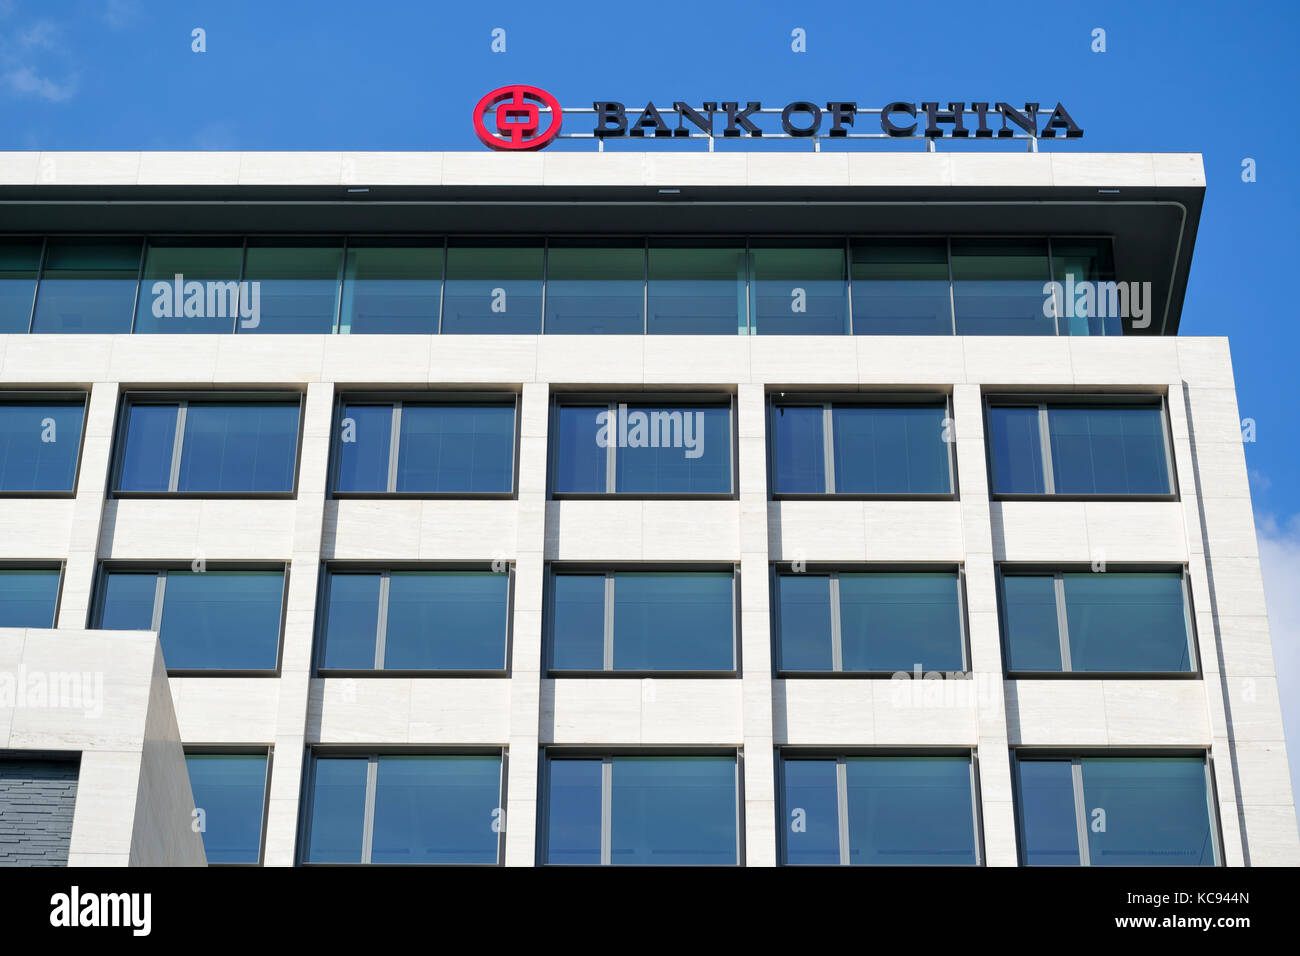 Bank of China sign at Rotterdam branch. The Bank of China is one of the 5 biggest state-owned commercial banks in China. Stock Photo